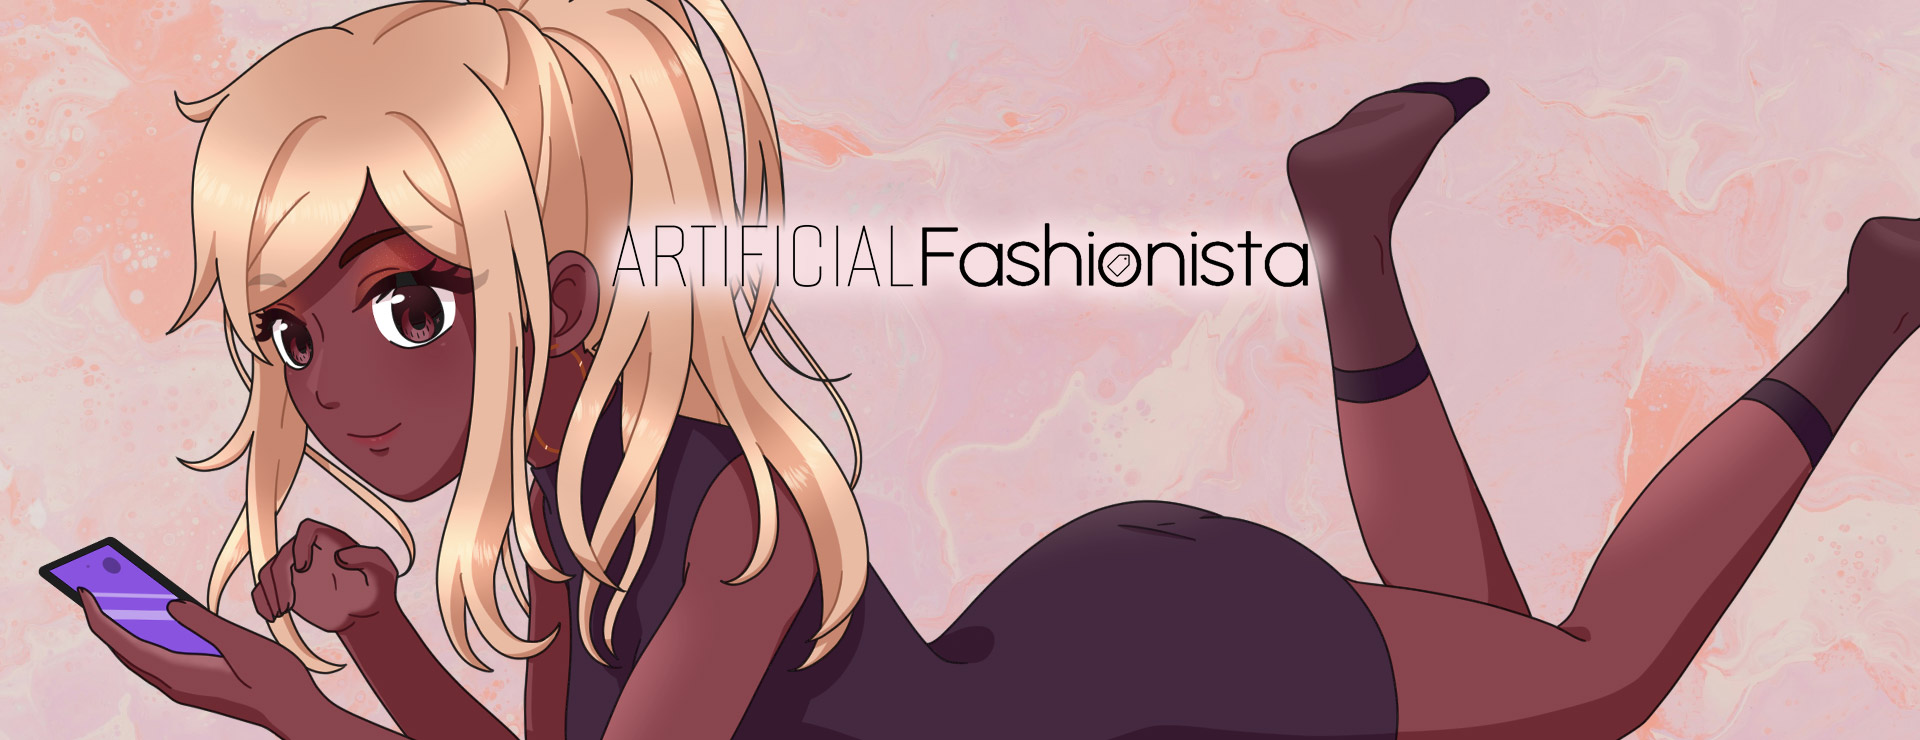 Artificial Fashionista - Action Adventure Game